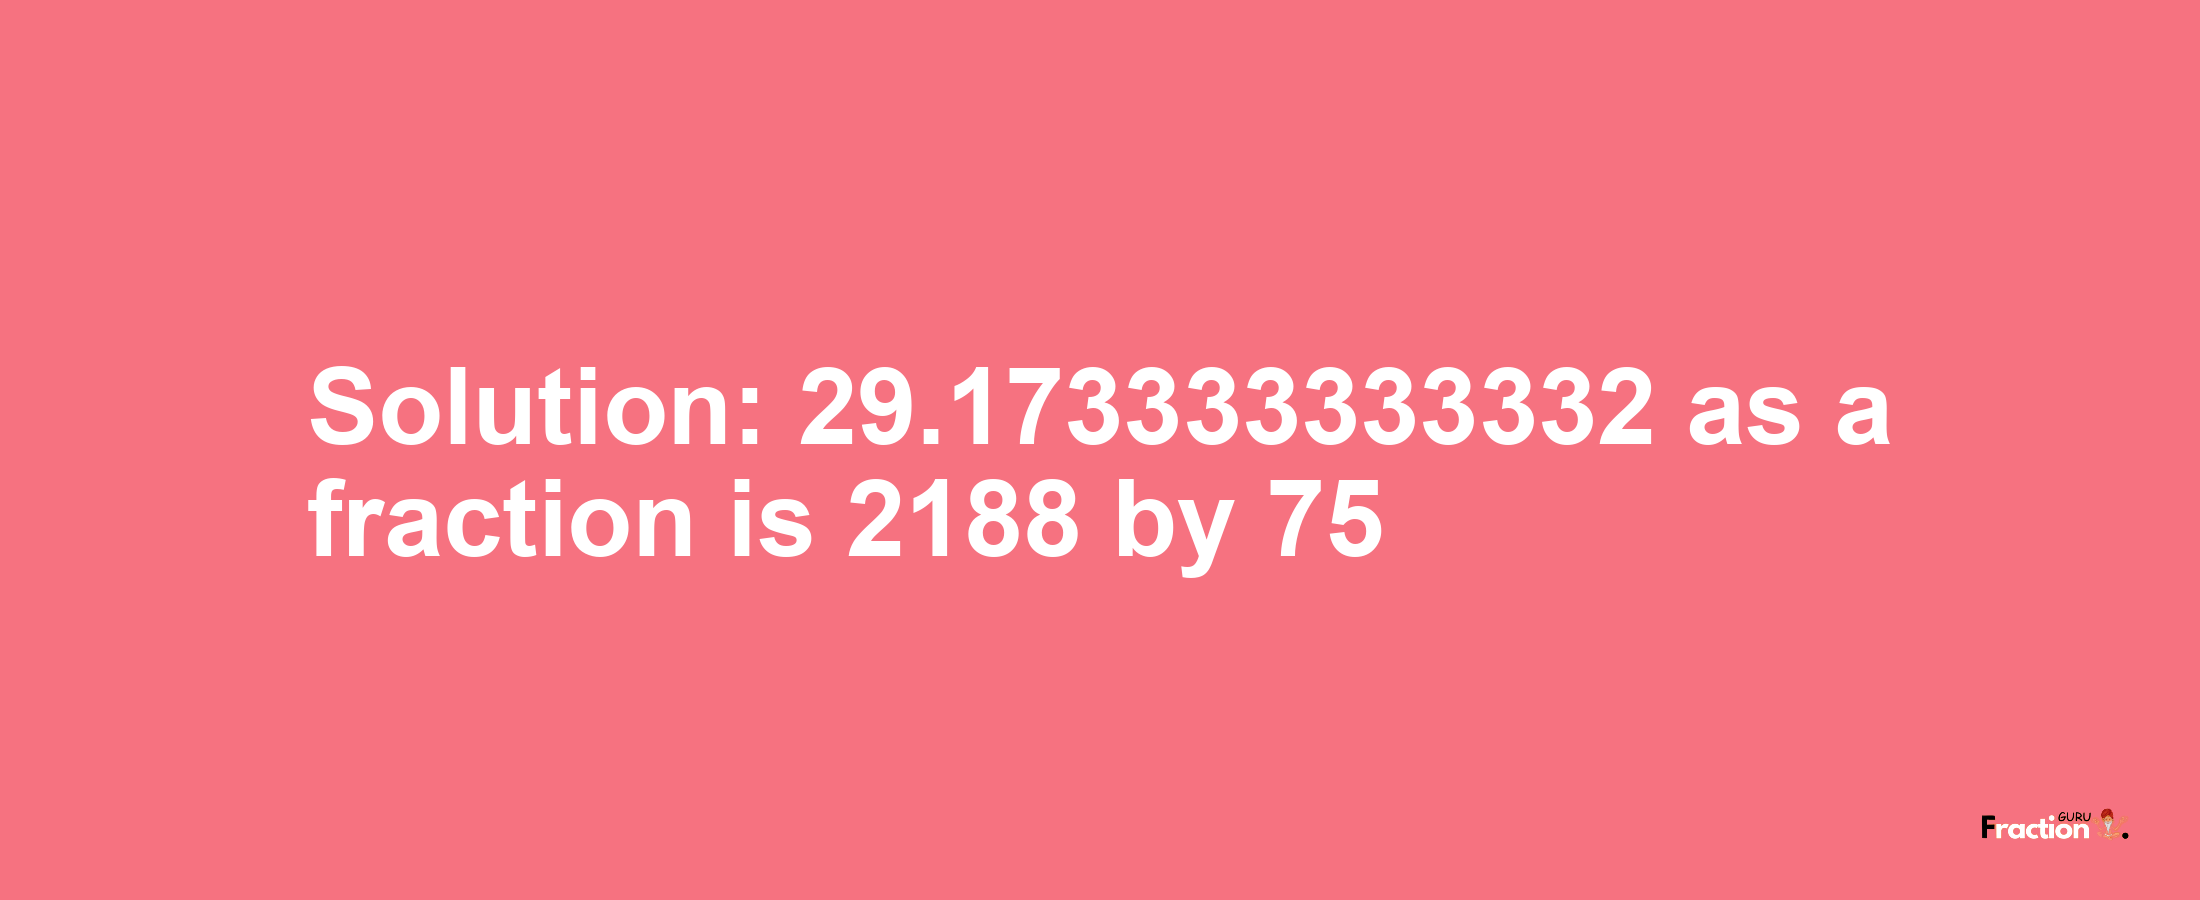 Solution:29.173333333332 as a fraction is 2188/75